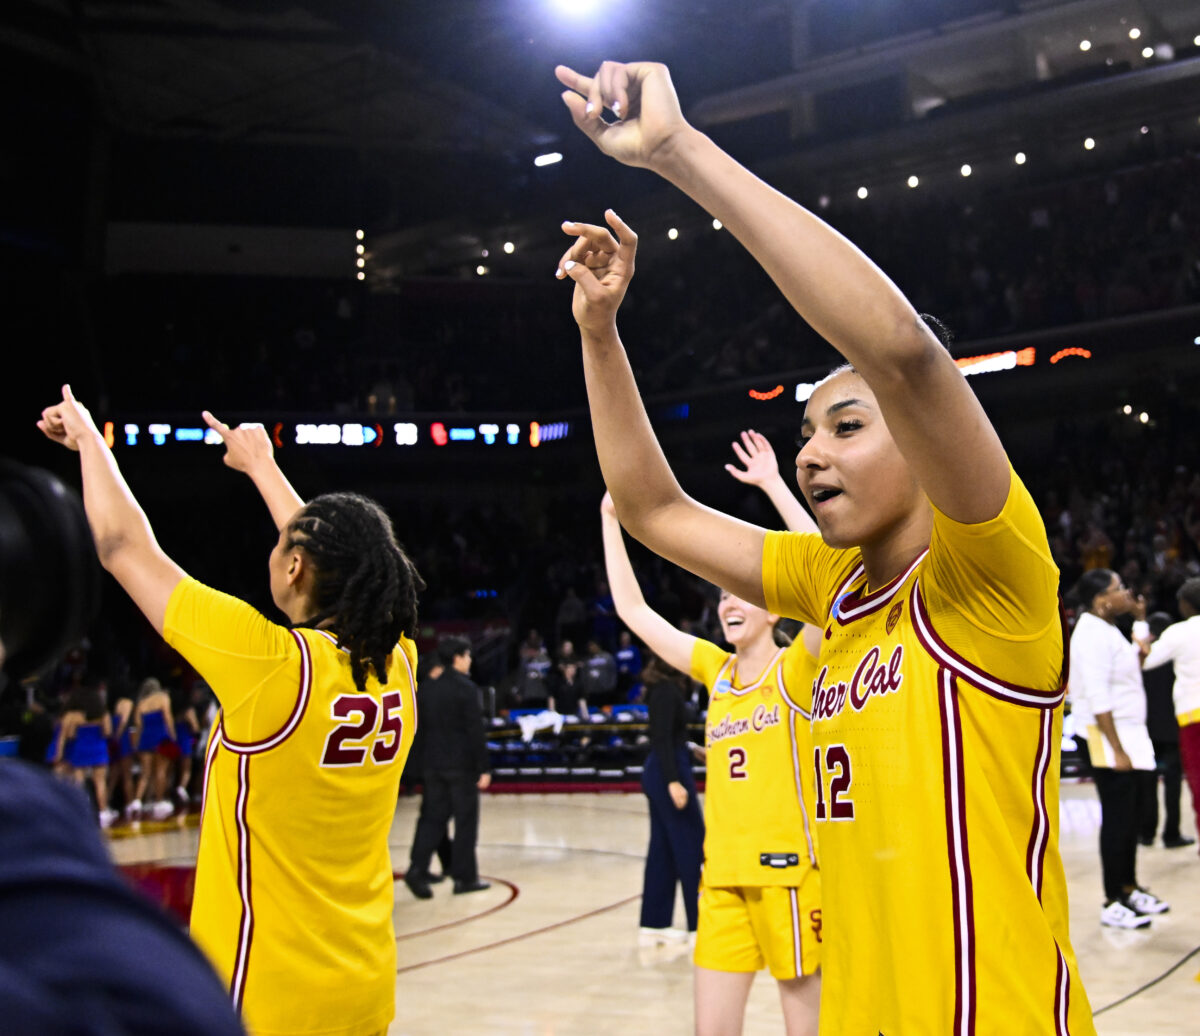 USC, Big Ten are poised to collect significant revenue from future Women’s NCAA Tournaments